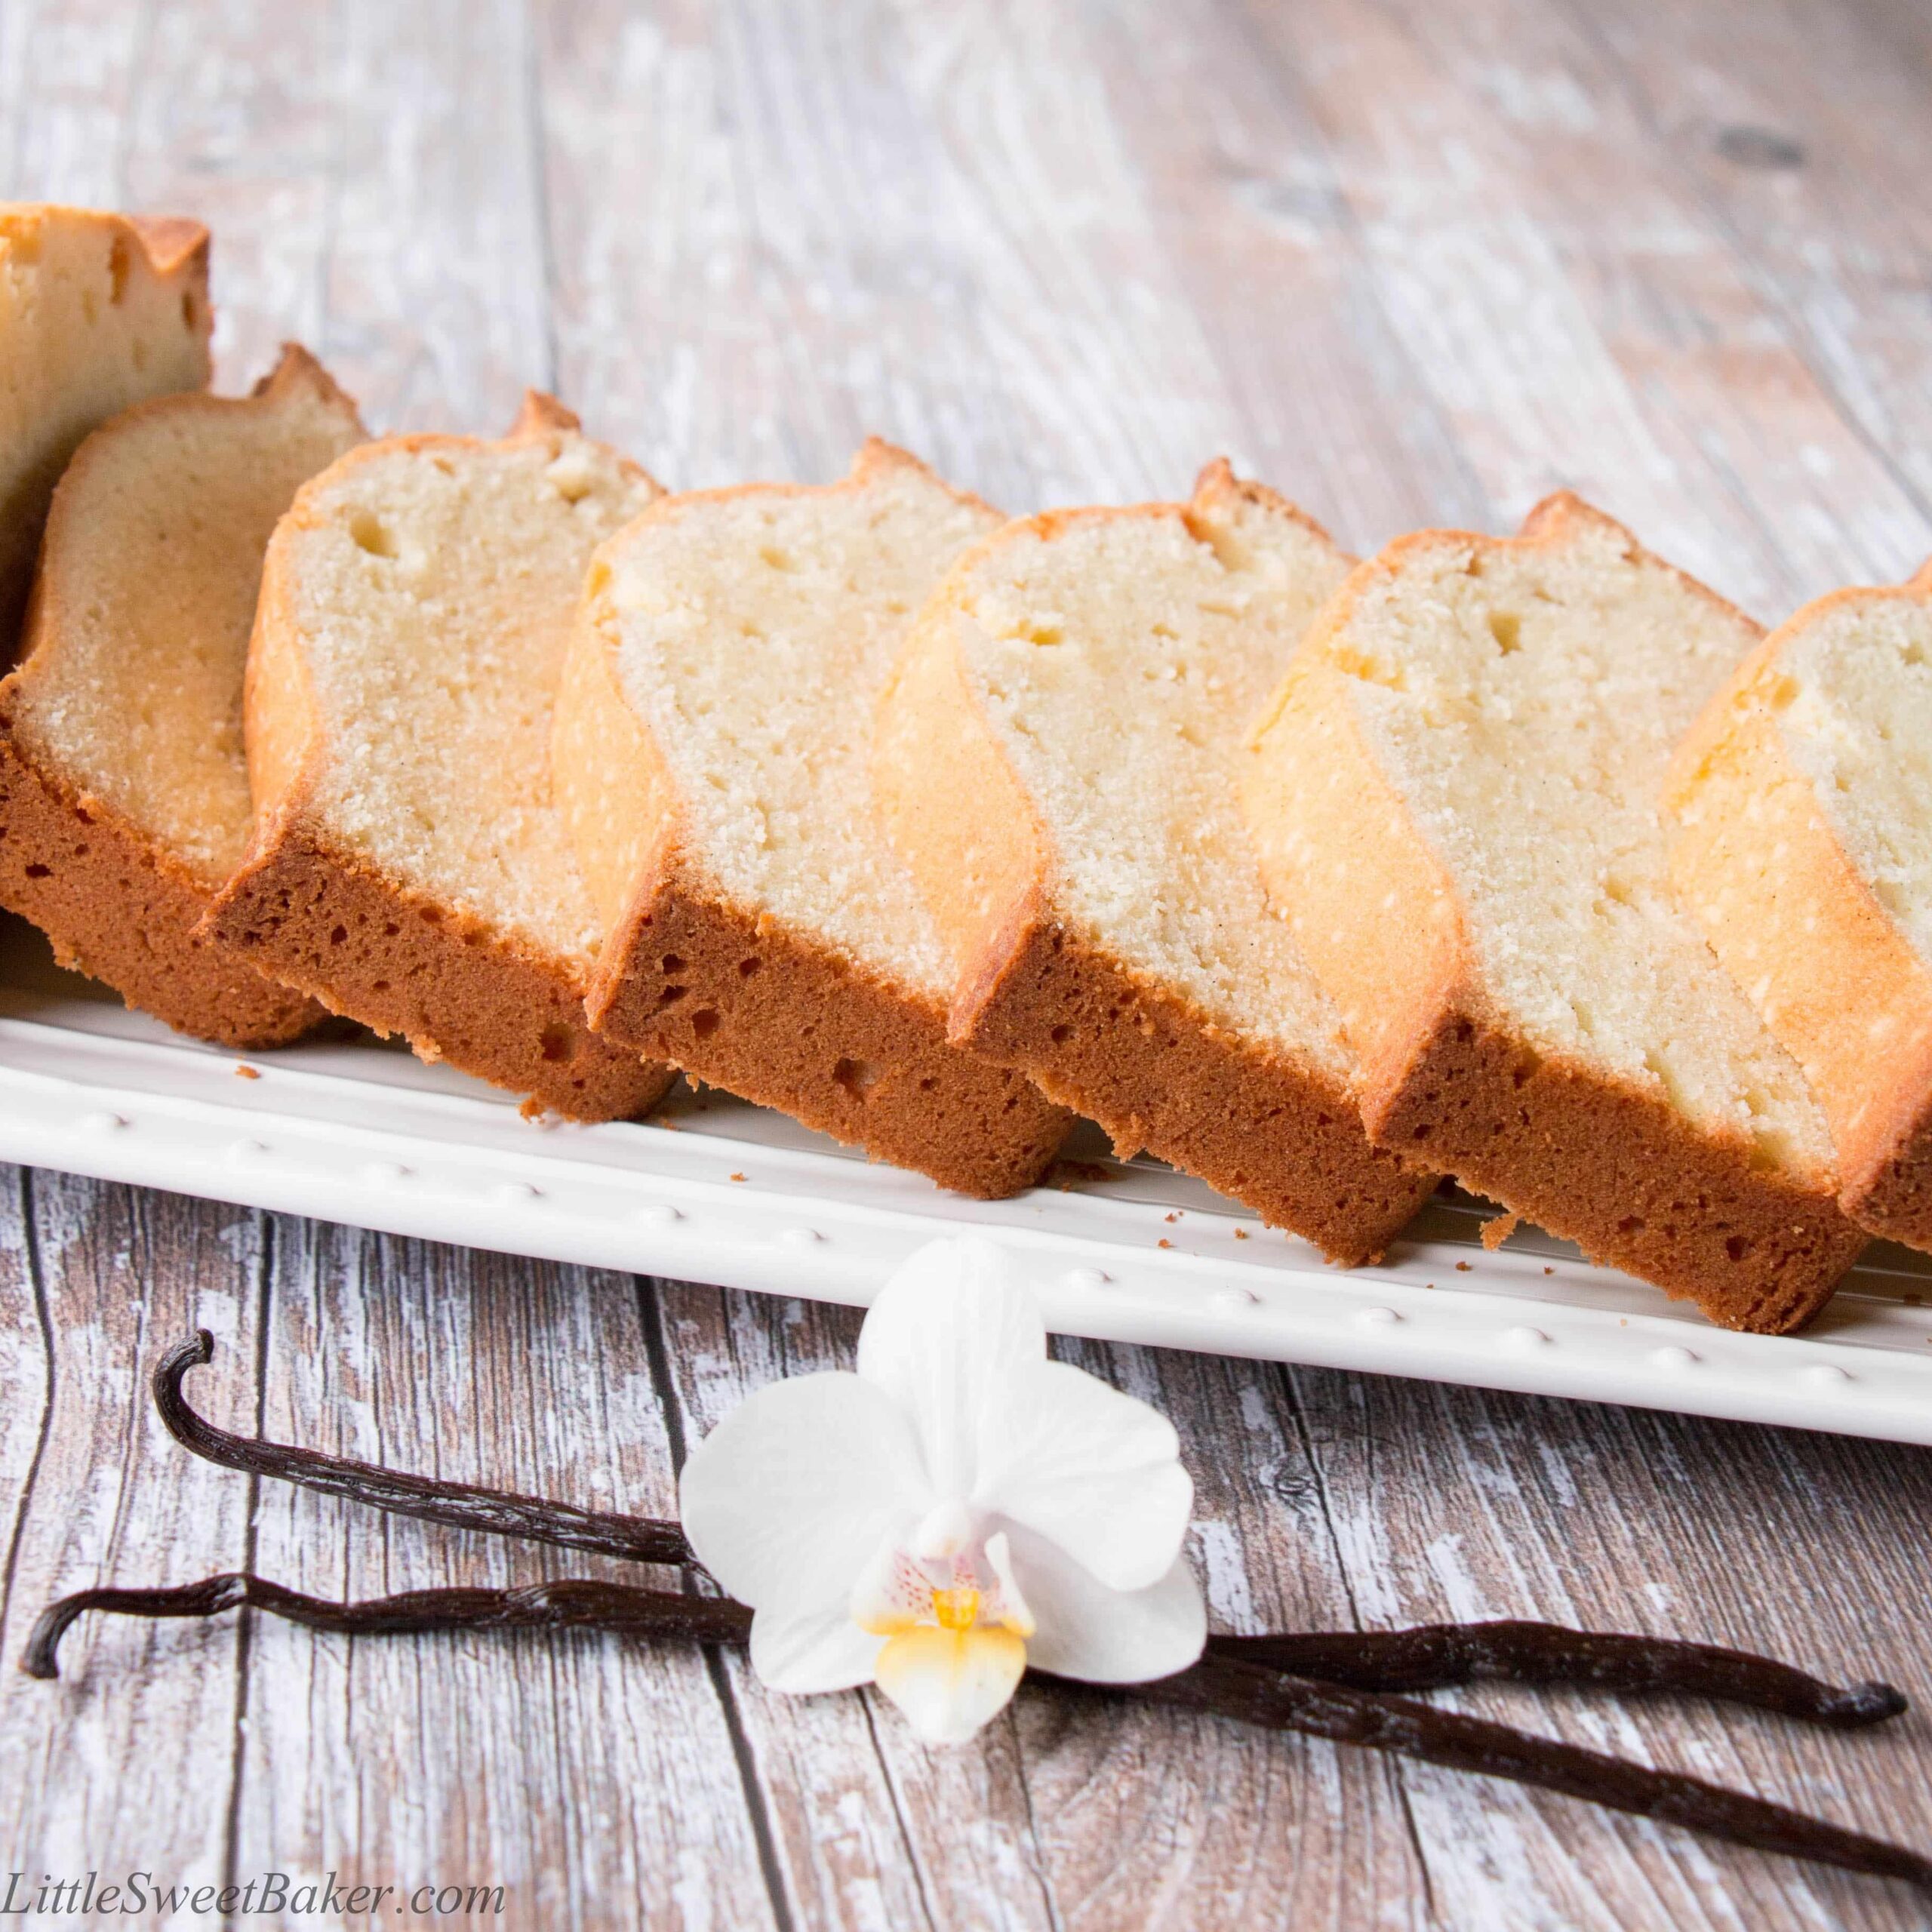  Curb your sweet tooth with this delicious Vanilla Bean Pound Cake!